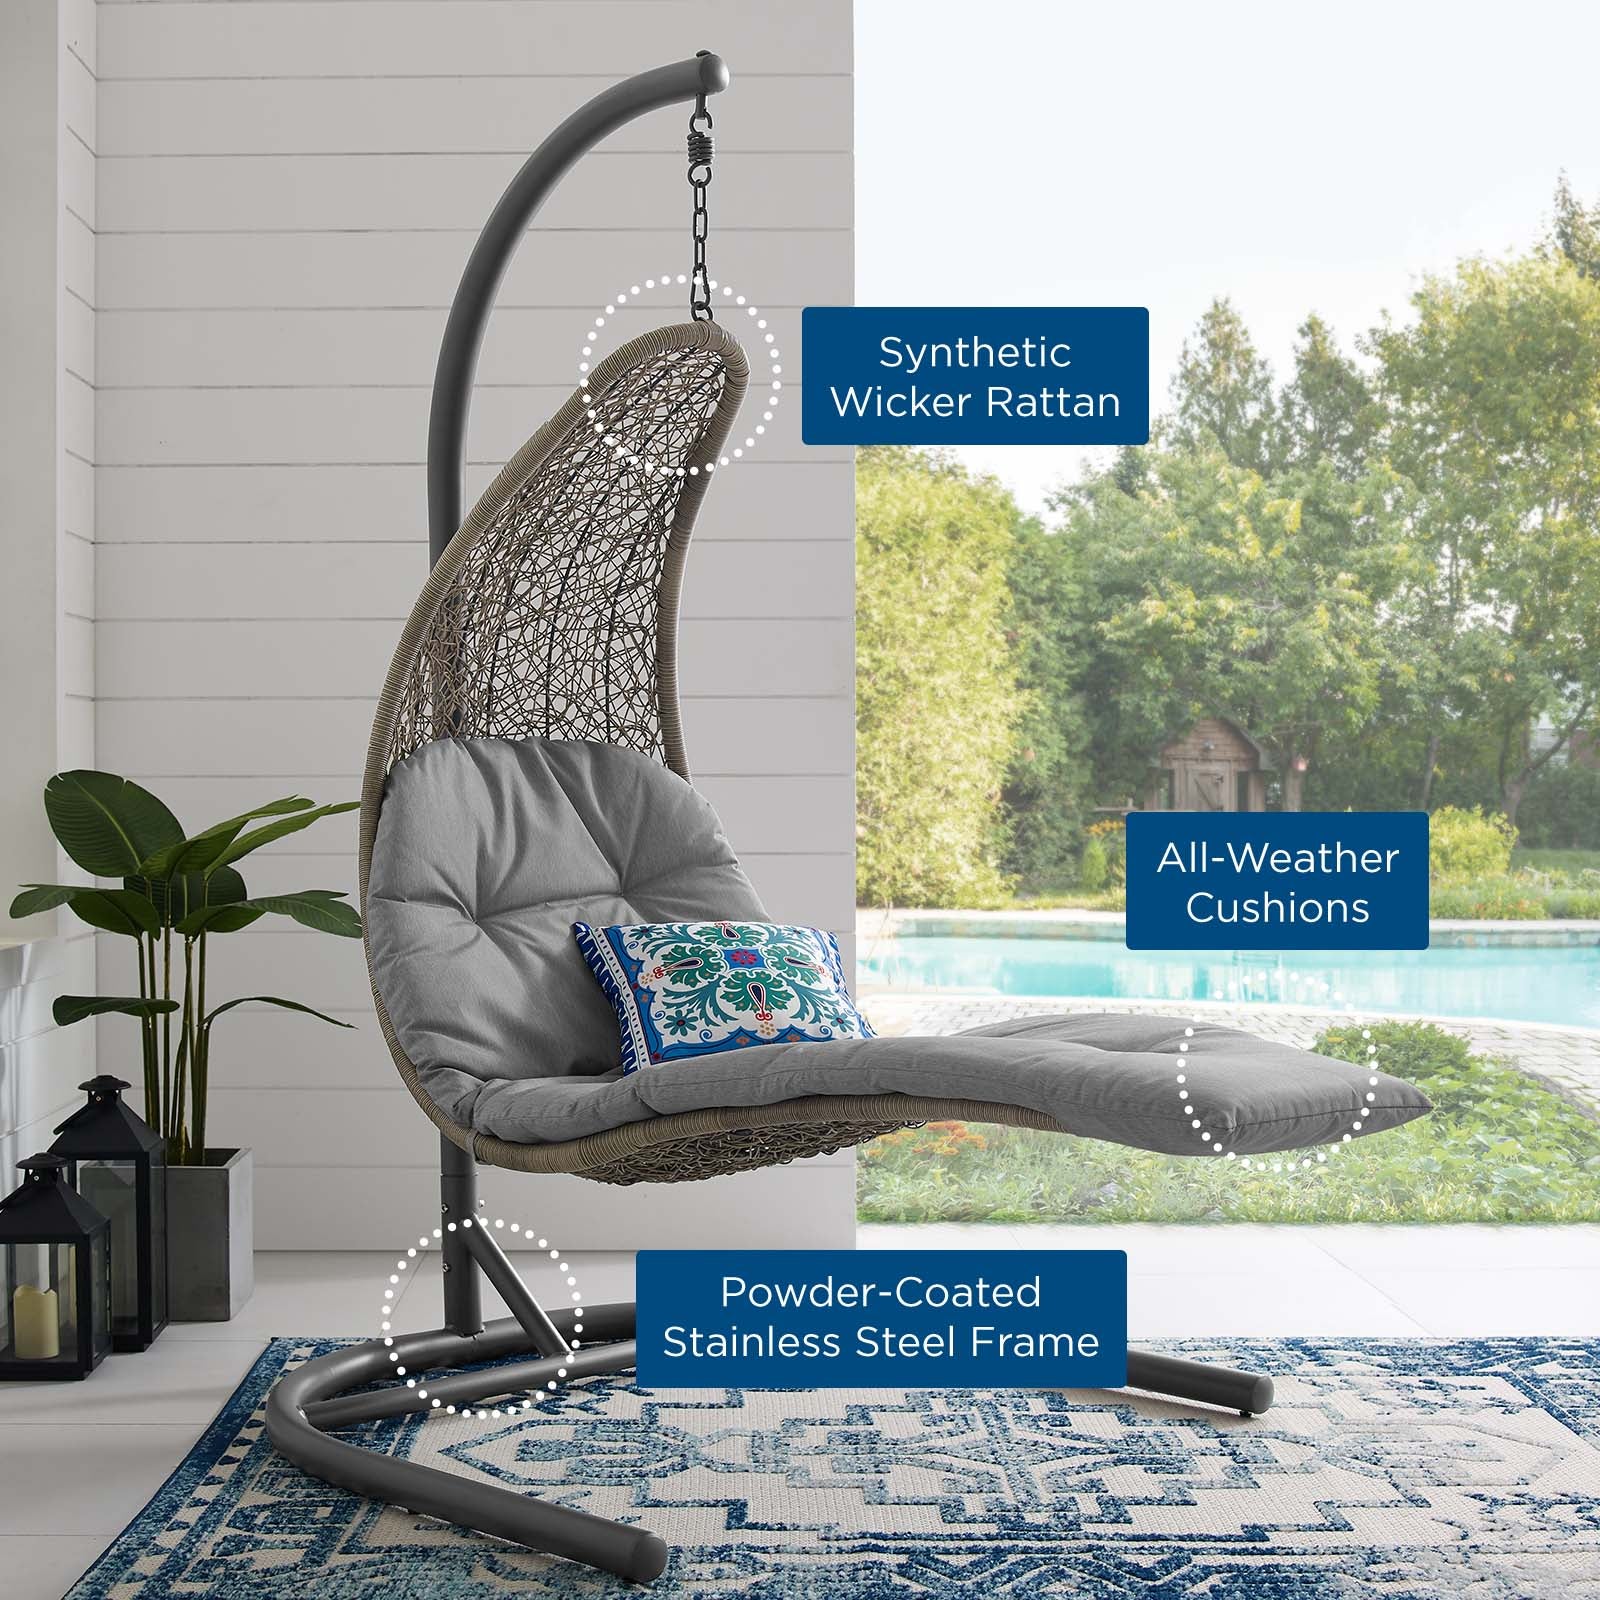 Modway Outdoor Swings - Landscape Hanging Chaise Lounge Outdoor Patio Swing Chair Light Gray